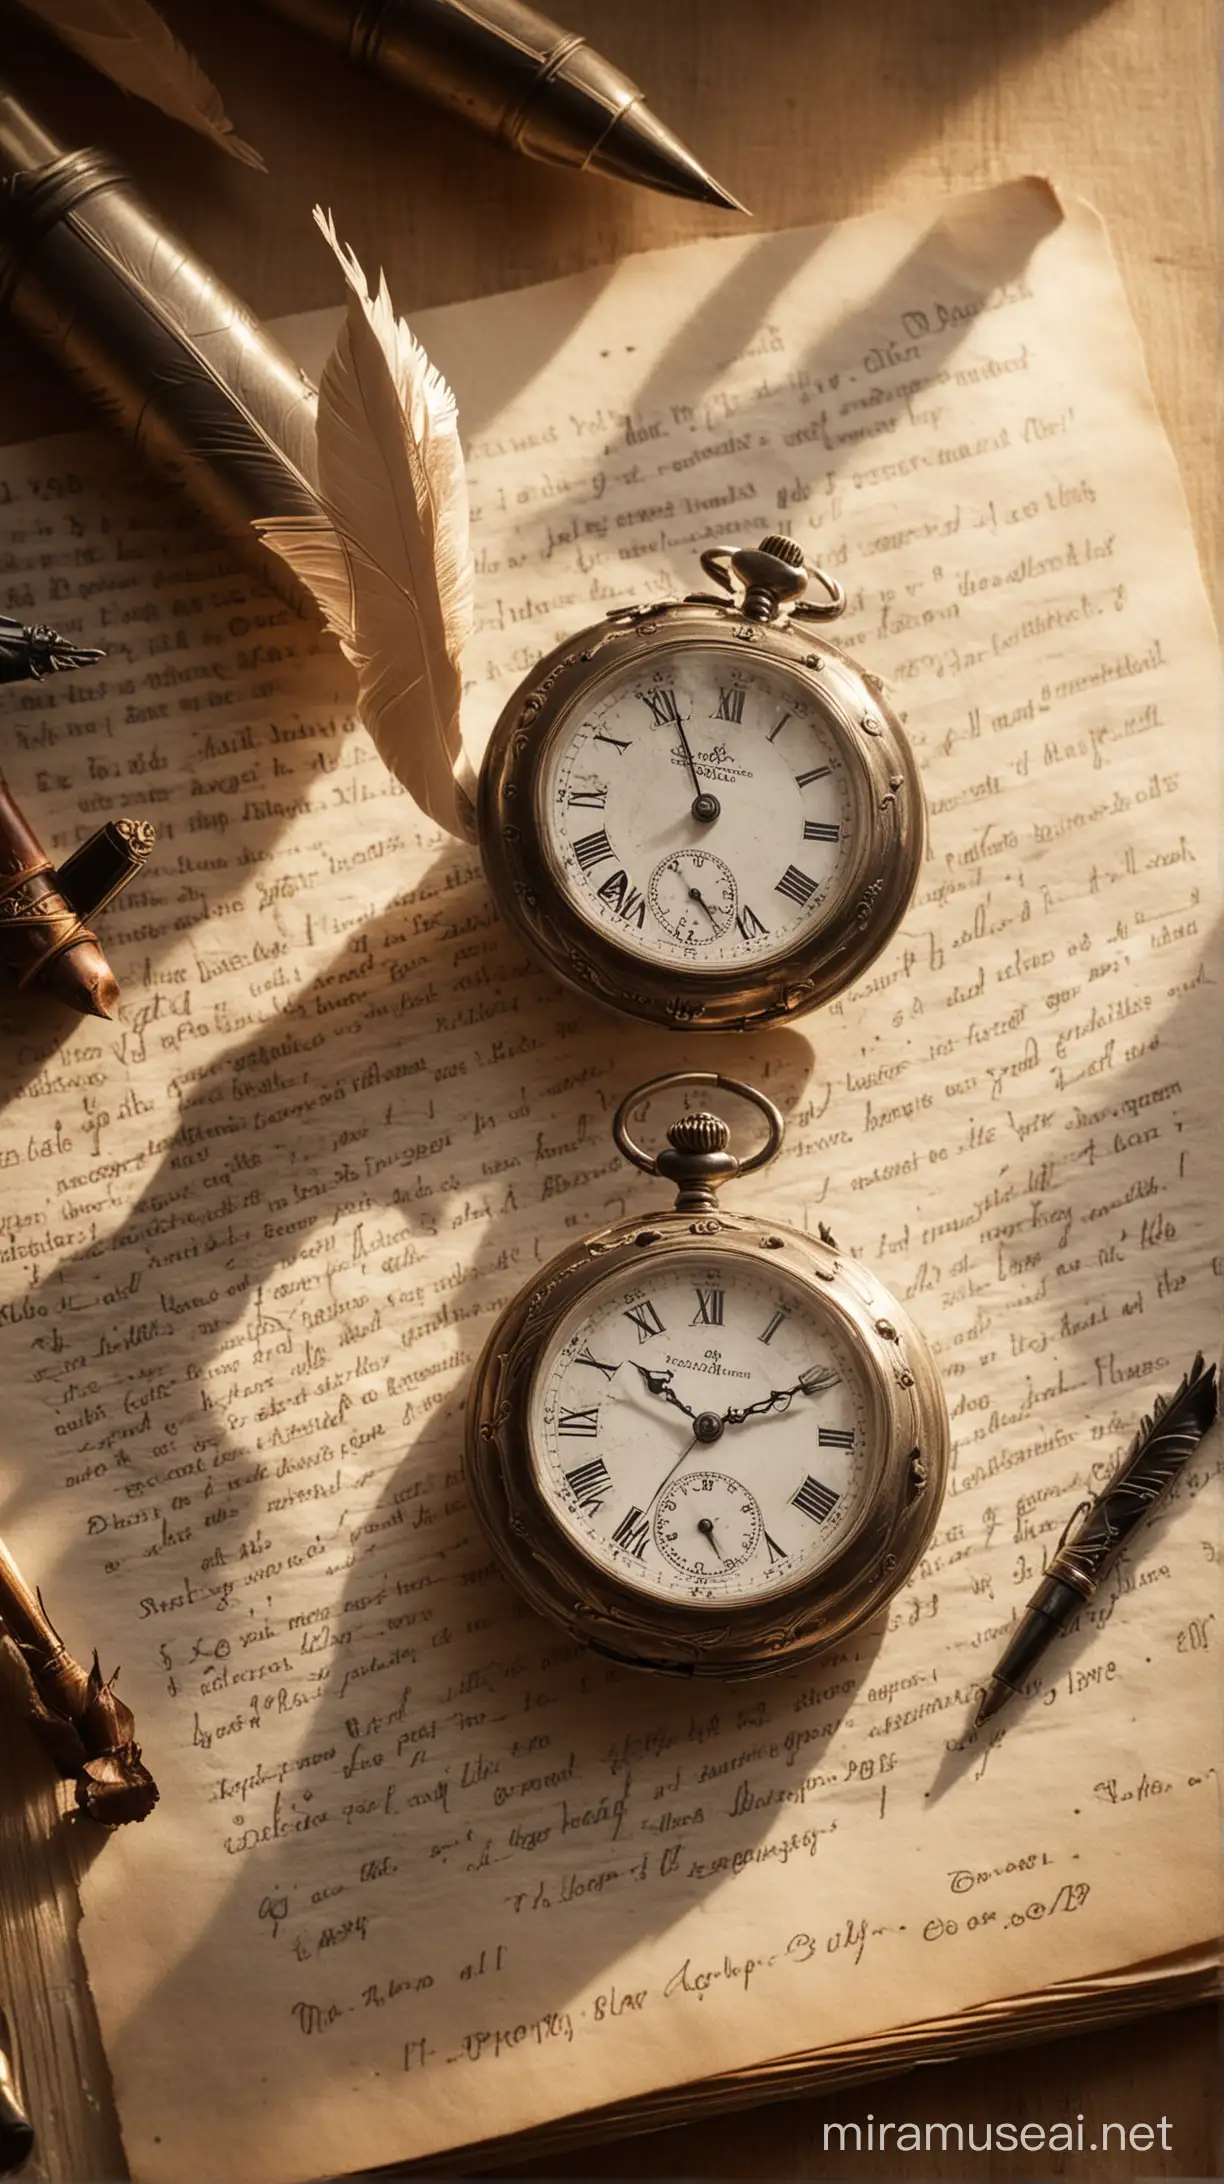 Vintage Pocket Watch on Aged Parchment with Quill Pens and Books